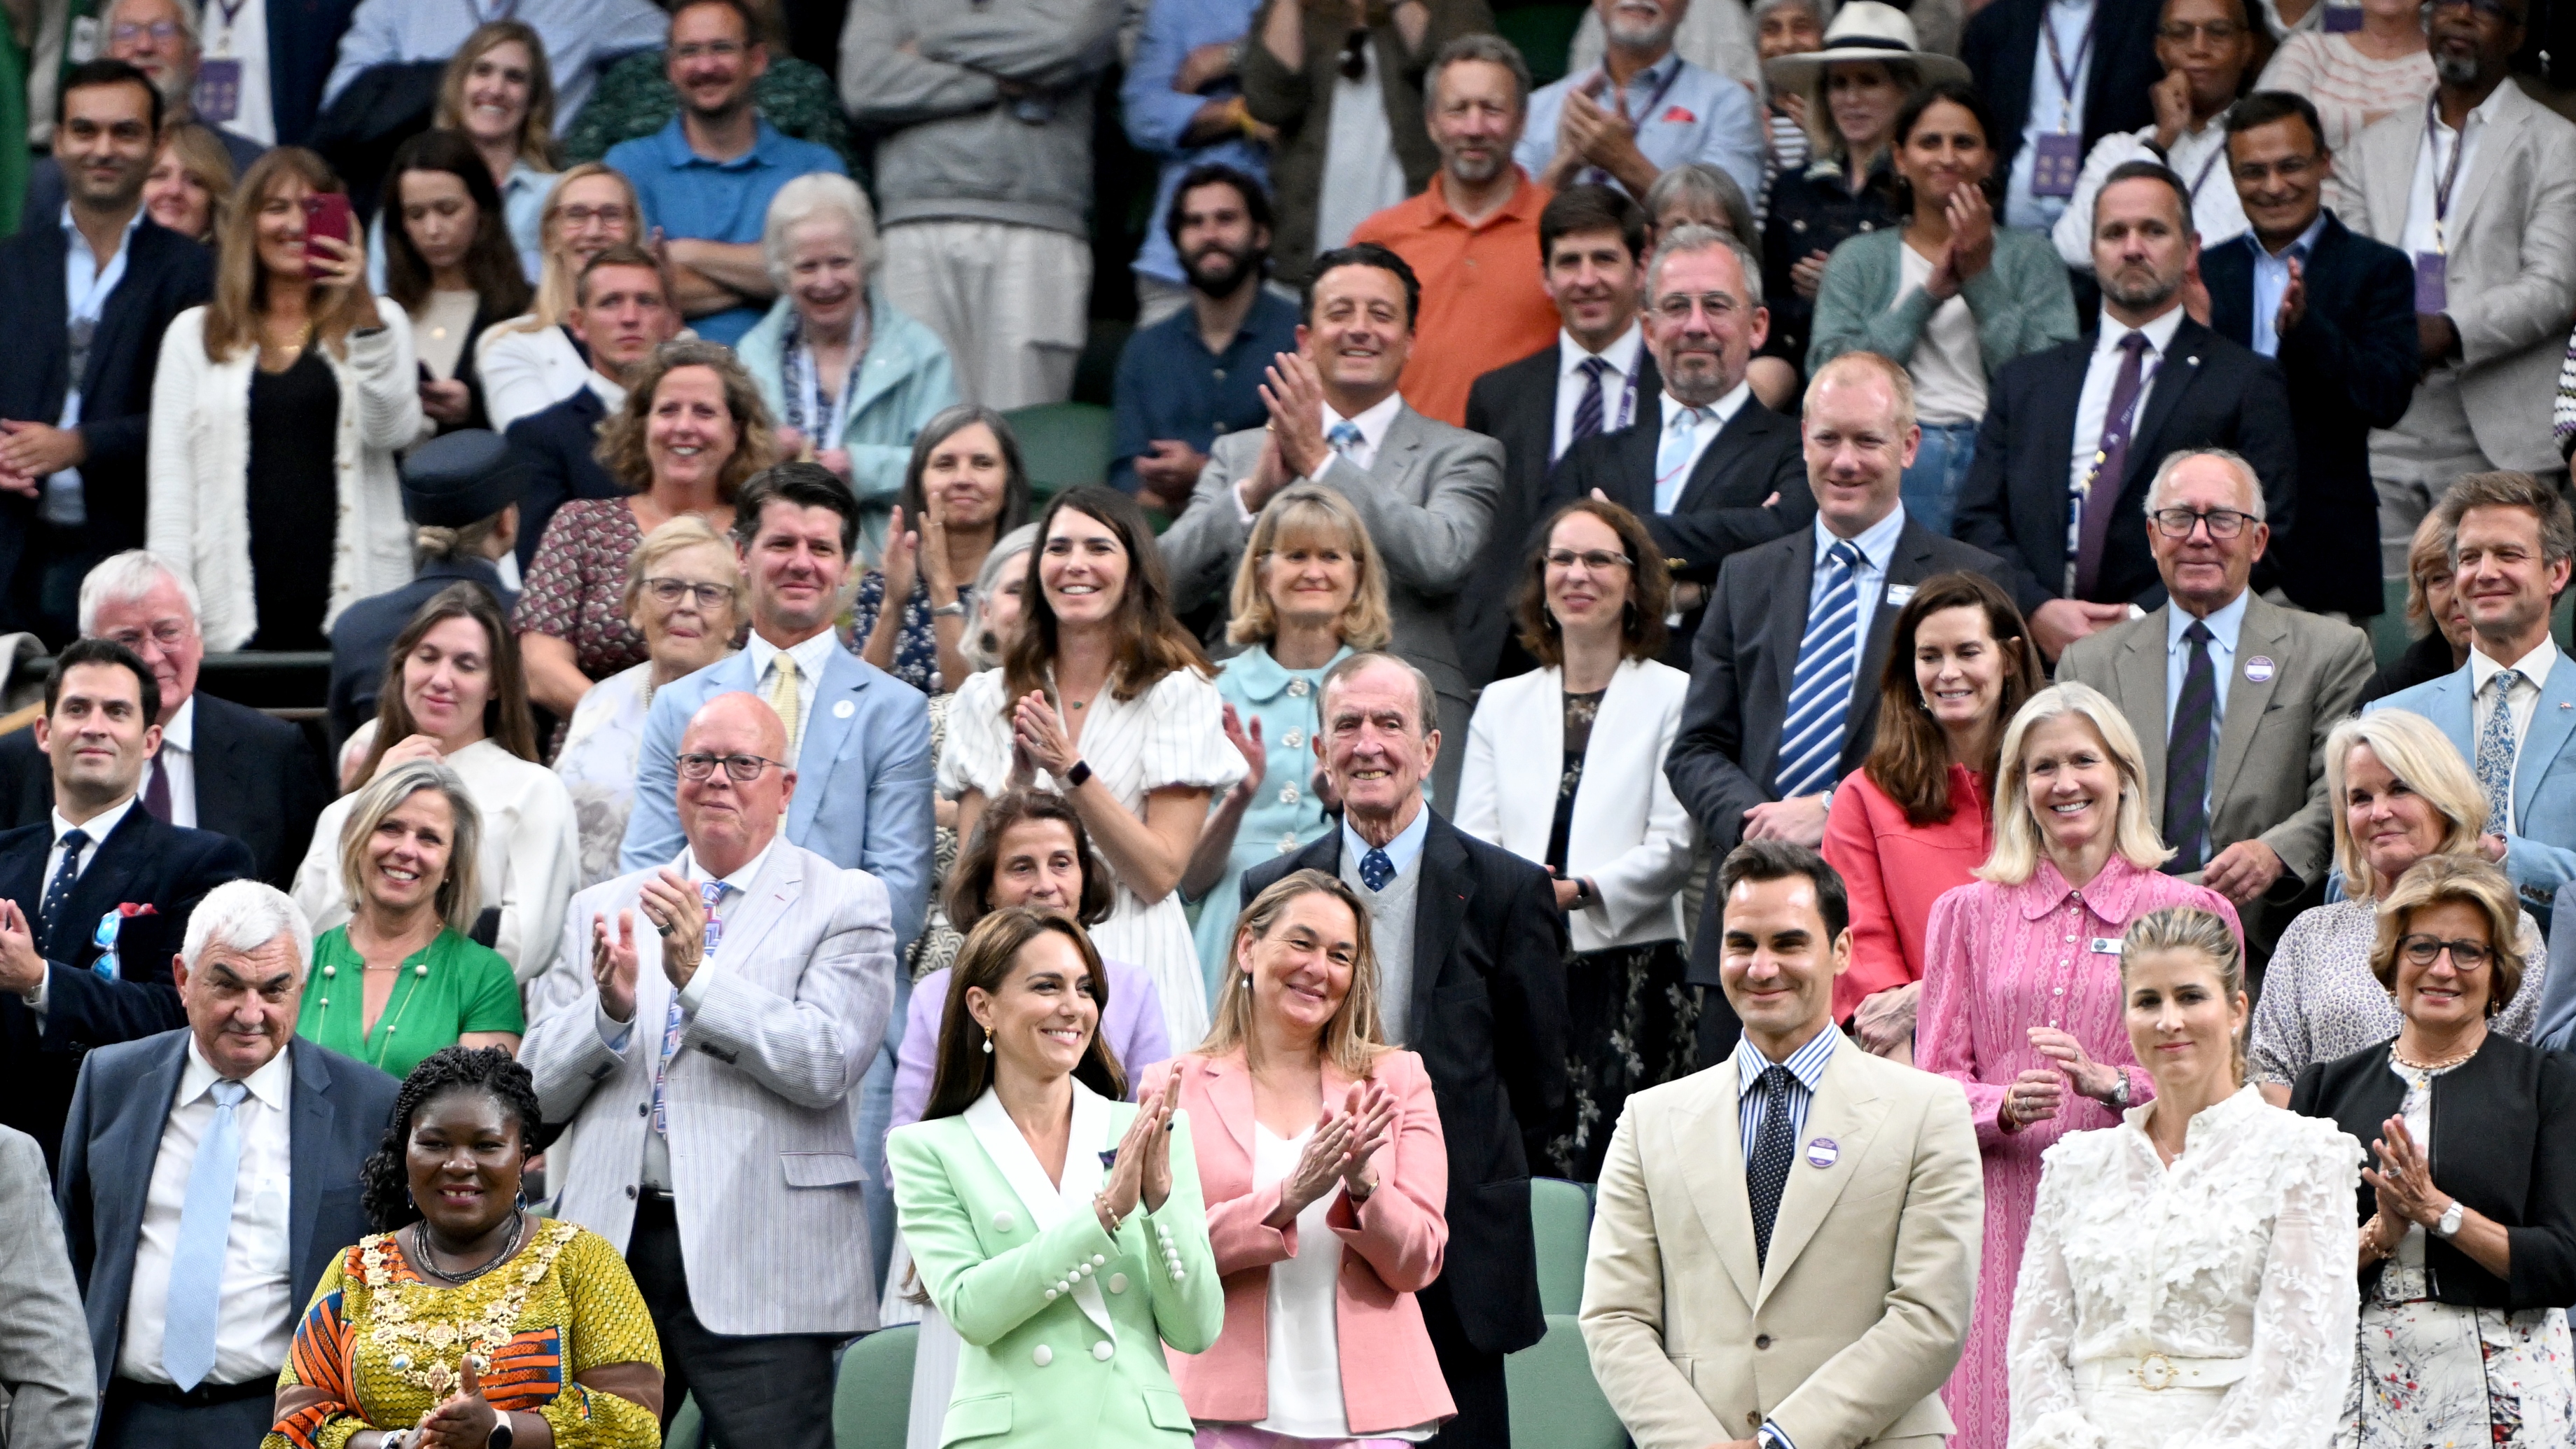 Everything to know about Wimbledon's Royal Box